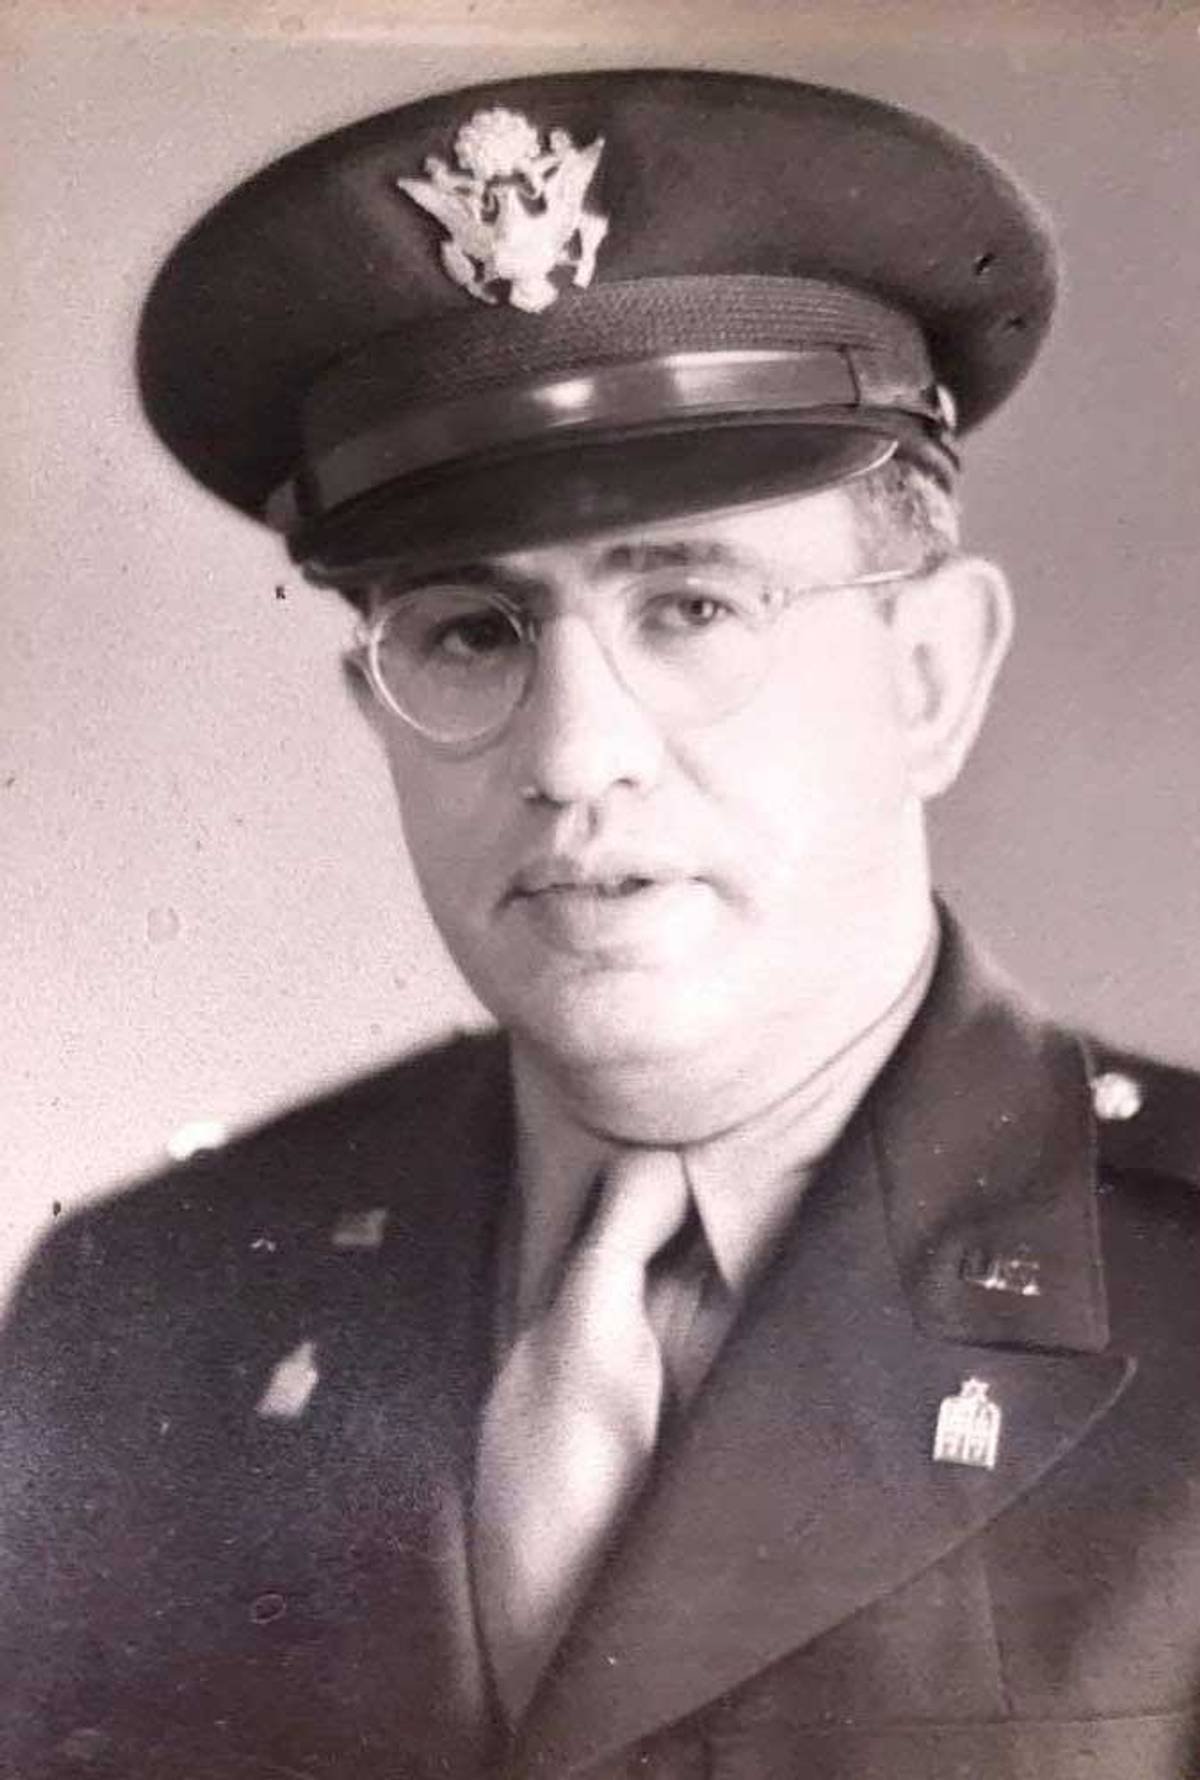 Nathan Zelizer as a military chaplain